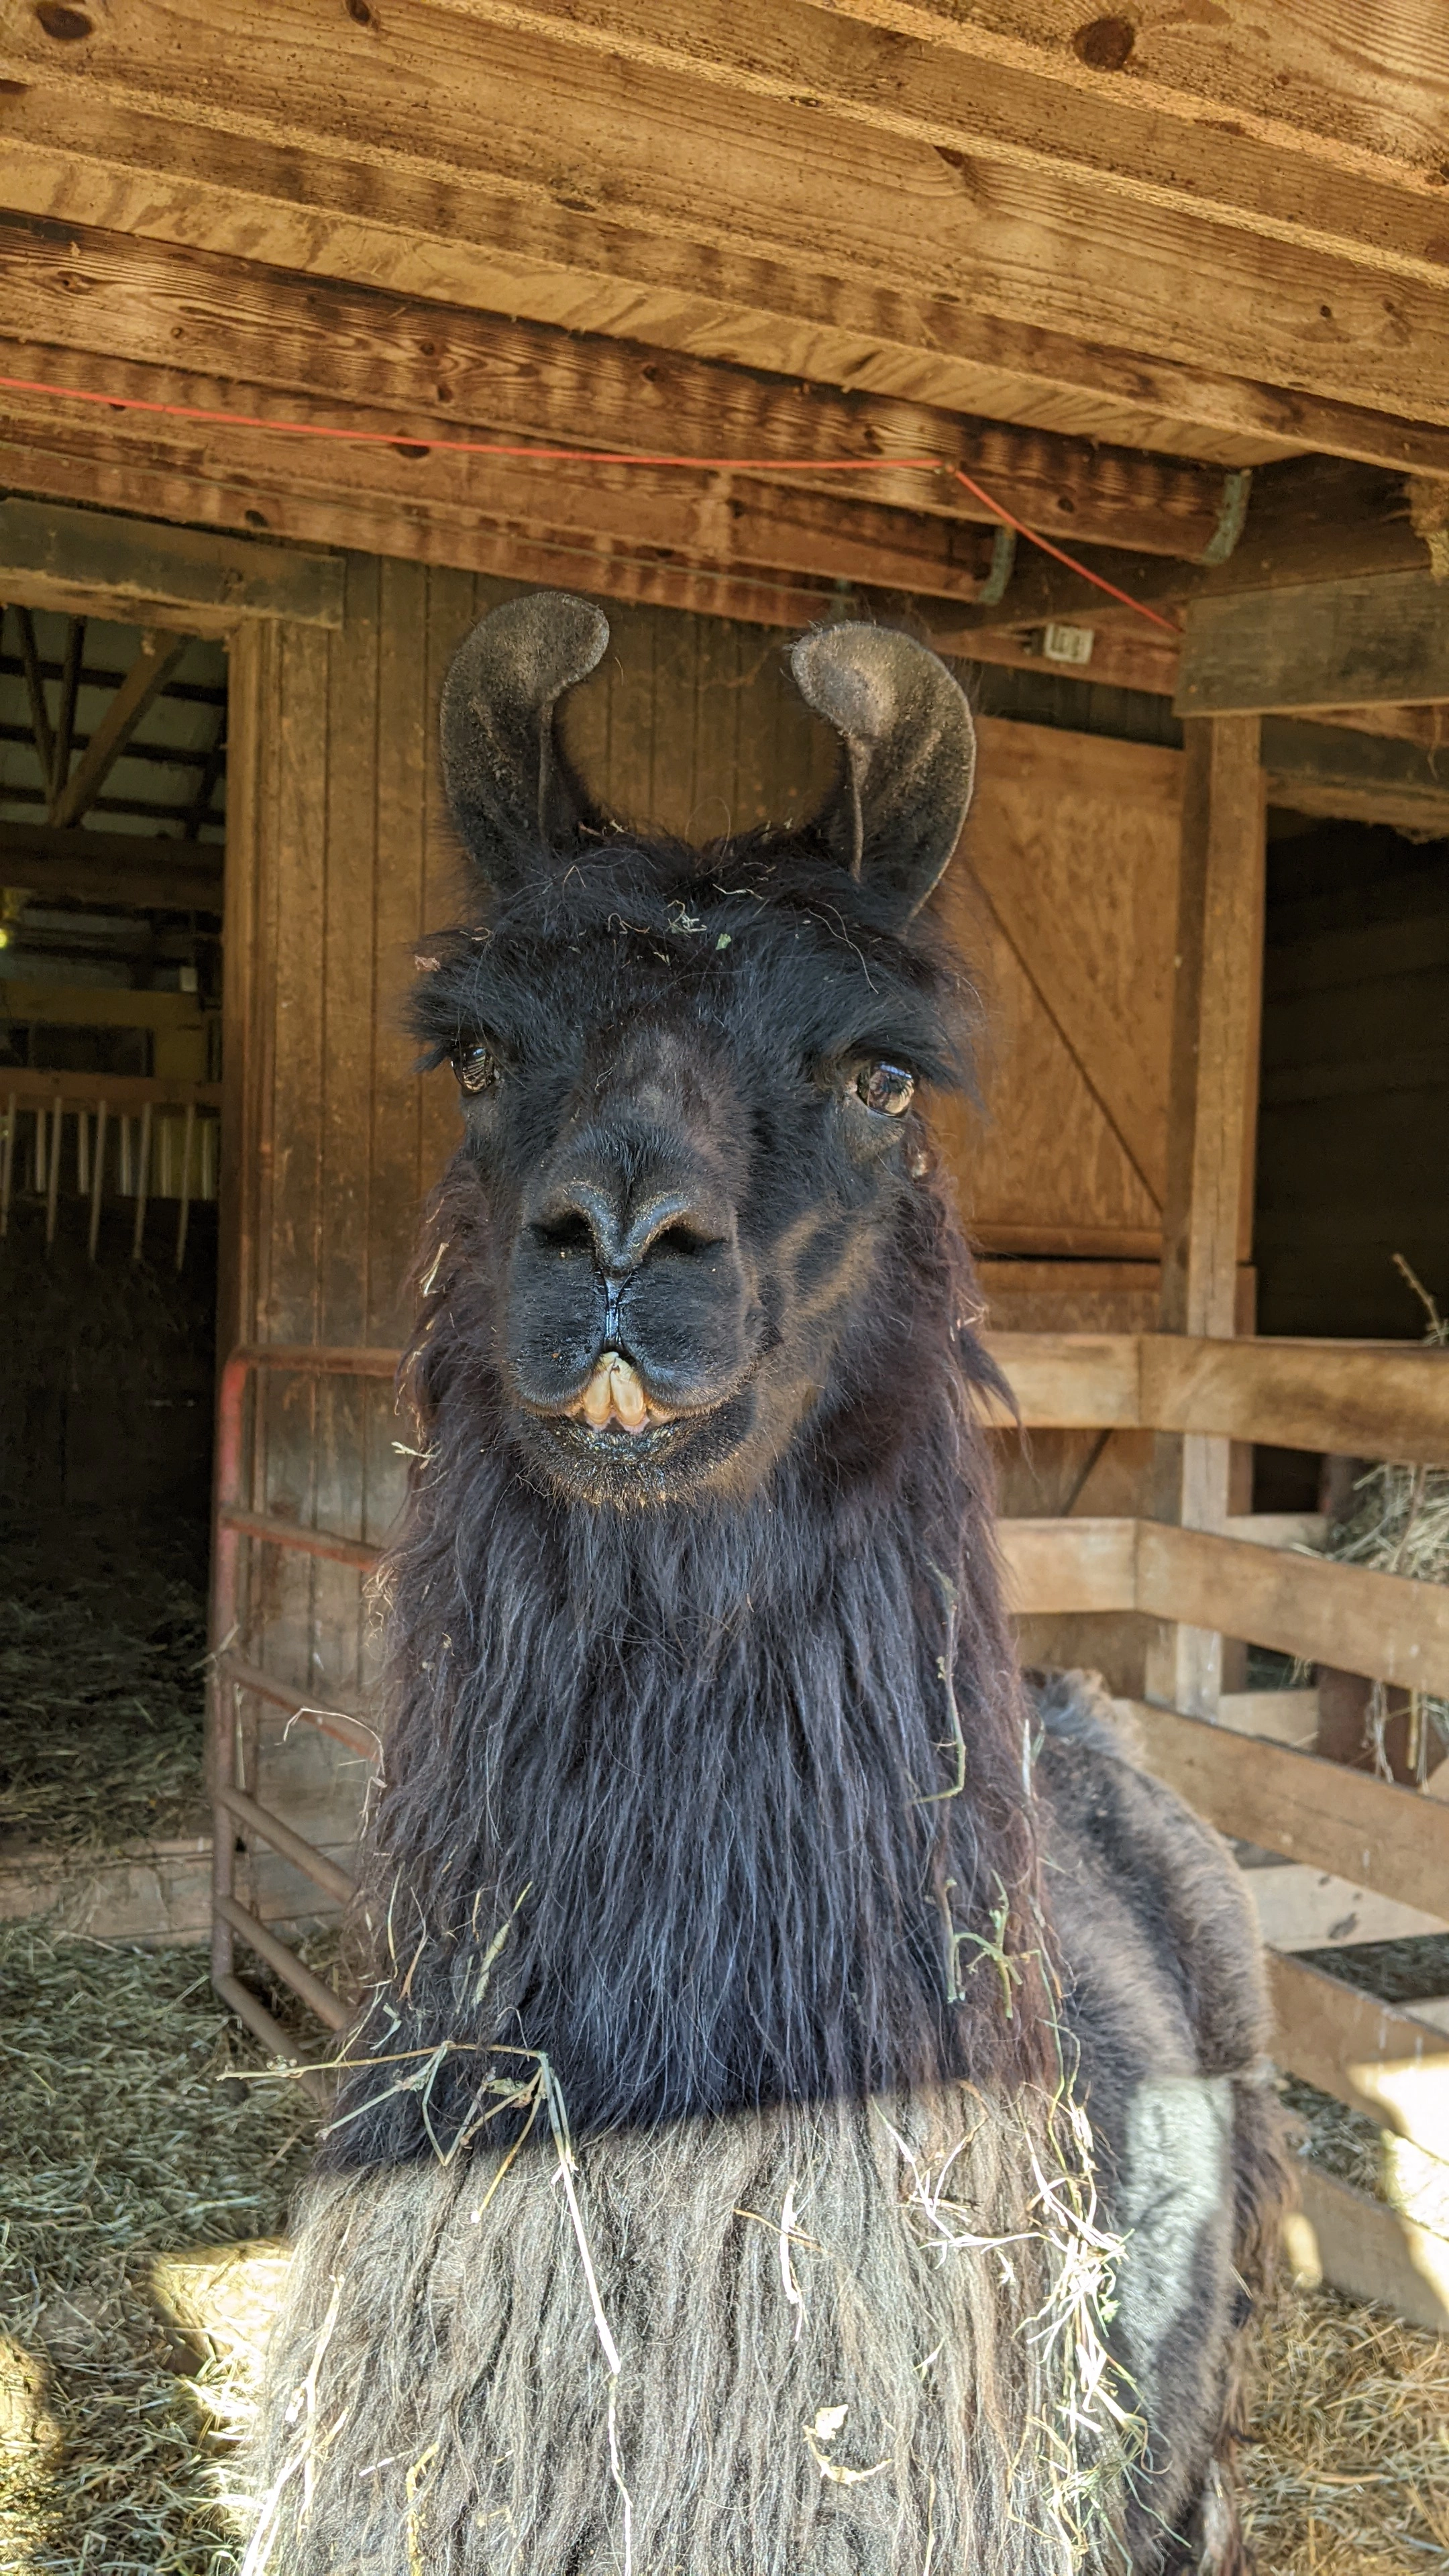 An image of a llama named Pete